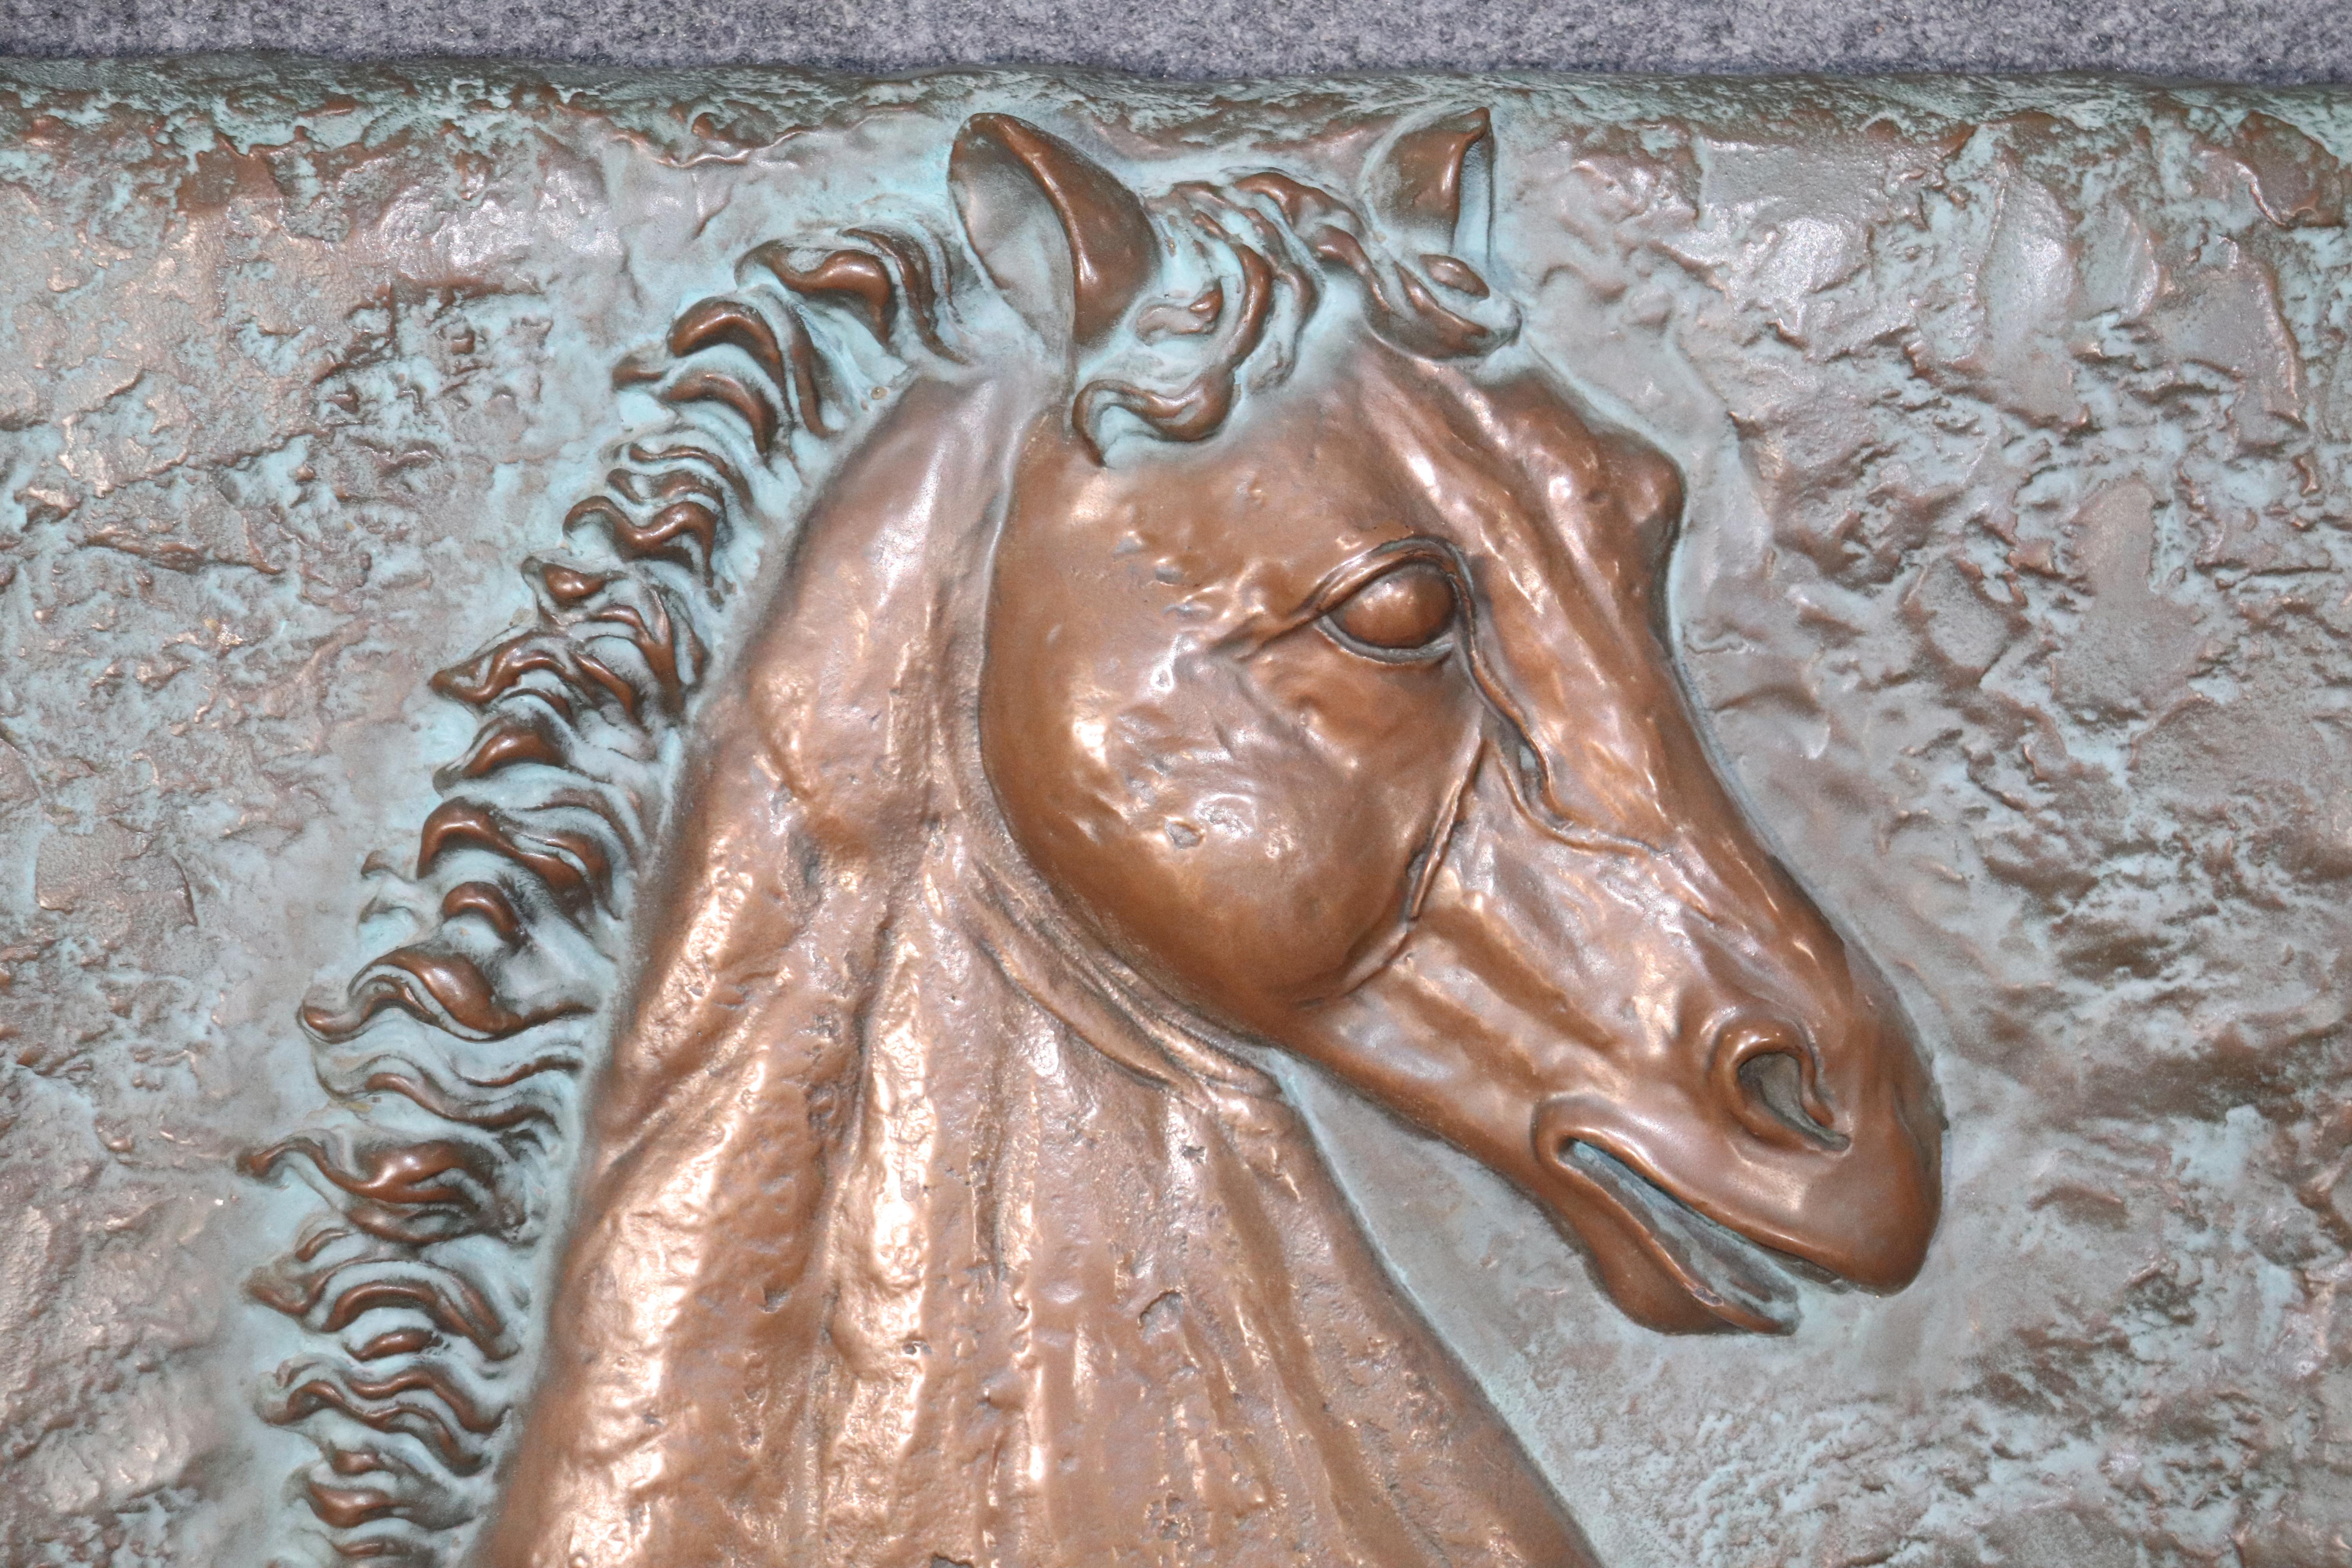 3-D relief artwork of a stallion painted in copper color.
Please confirm location.